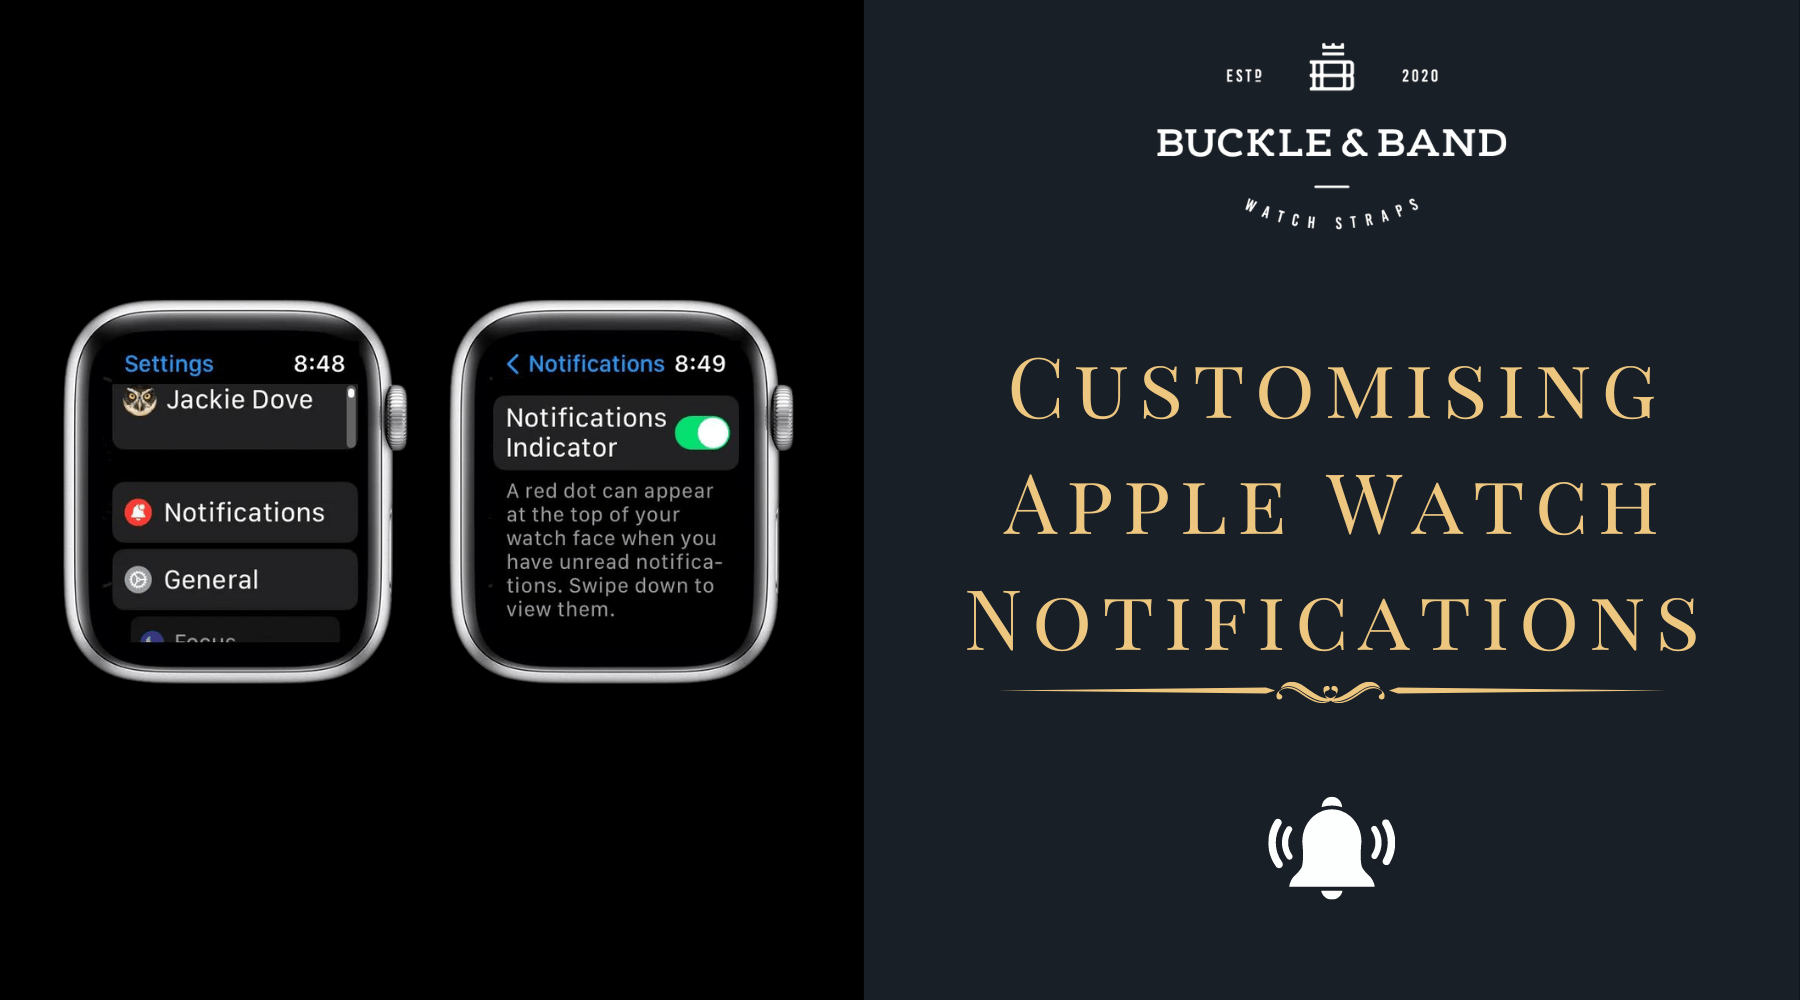 Customising your Apple Watch notifications - Buckle and Band